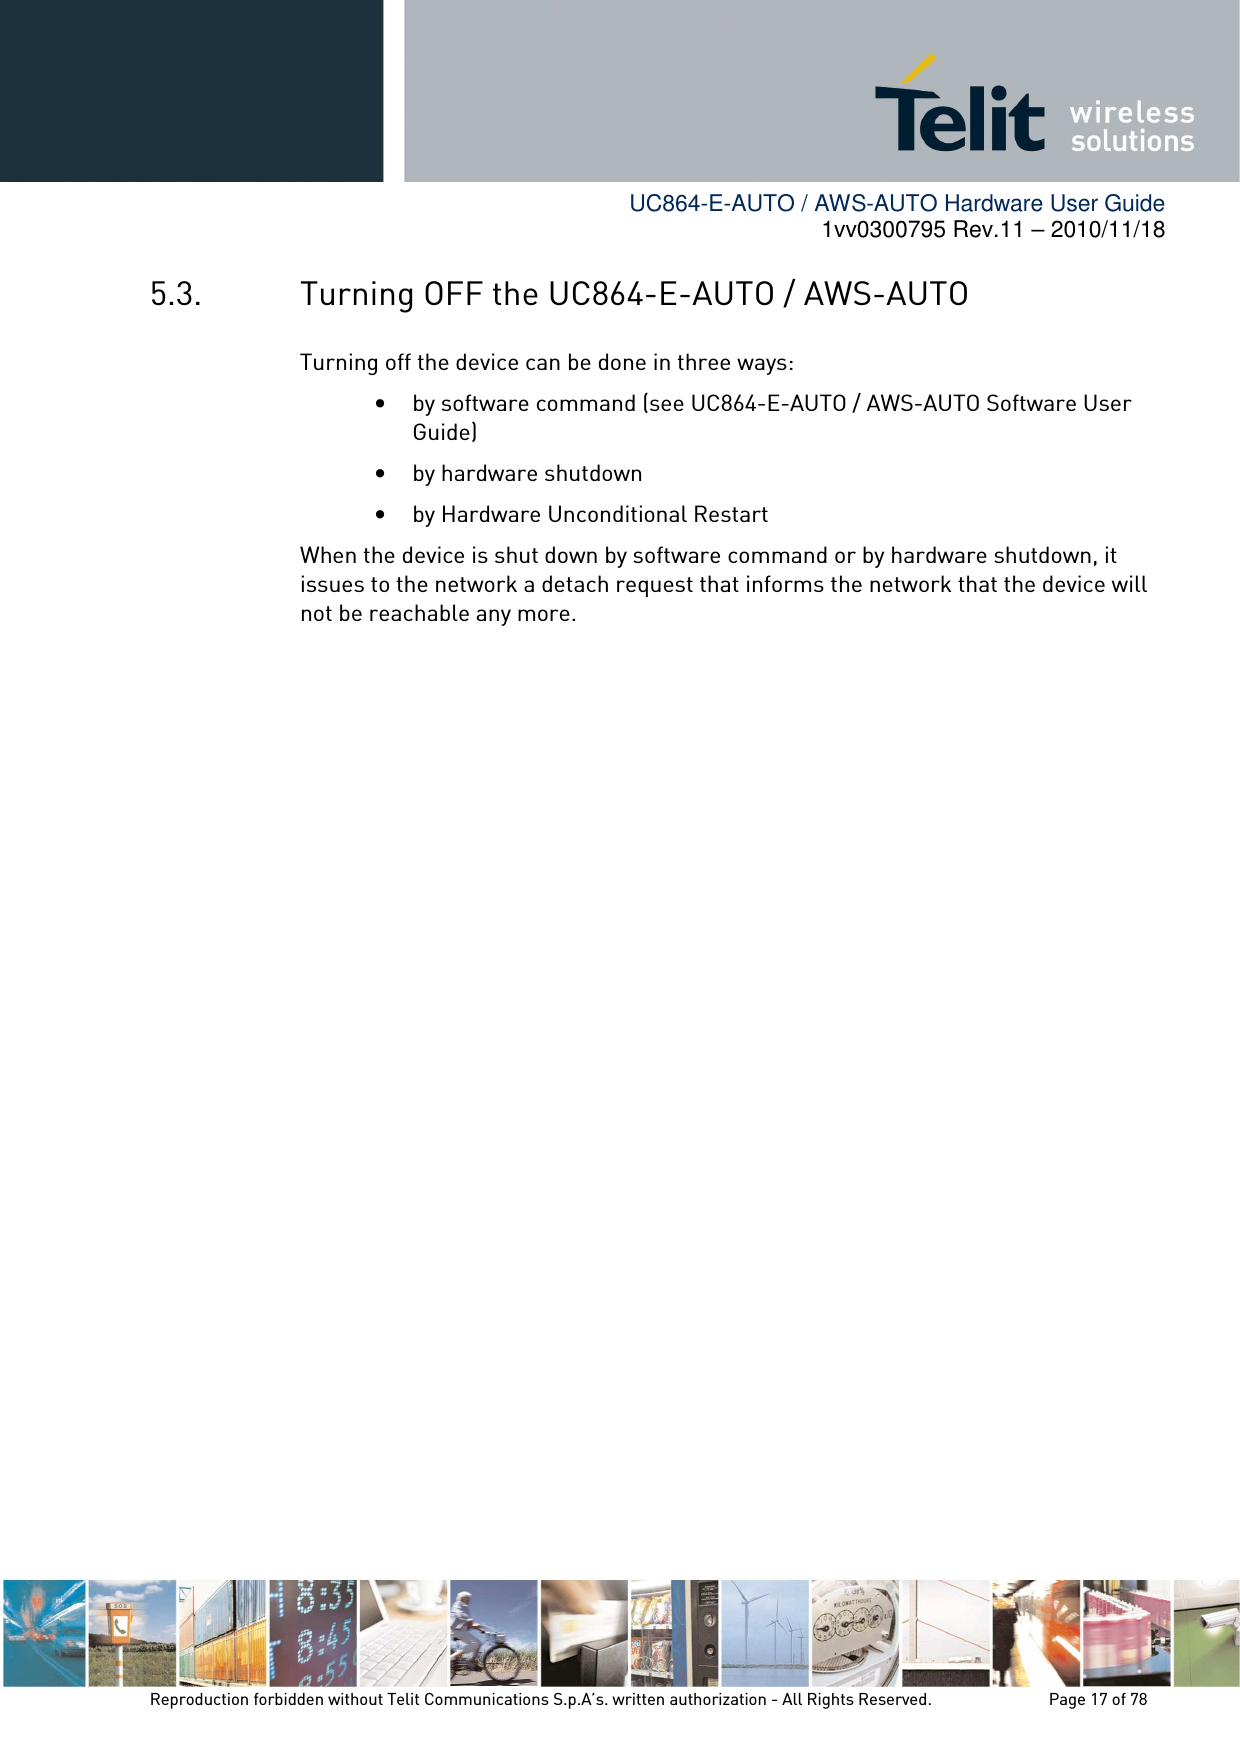        UC864-E-AUTO / AWS-AUTO Hardware User Guide 1vv0300795 Rev.11 – 2010/11/18     Reproduction forbidden without Telit Communications S.p.A’s. written authorization - All Rights Reserved.    Page 17 of 78  5.3. Turning OFF the UC864-E-AUTO / AWS-AUTO Turning off the device can be done in three ways: • by software command (see UC864-E-AUTO / AWS-AUTO Software User Guide) • by hardware shutdown • by Hardware Unconditional Restart When the device is shut down by software command or by hardware shutdown, it issues to the network a detach request that informs the network that the device will not be reachable any more.  